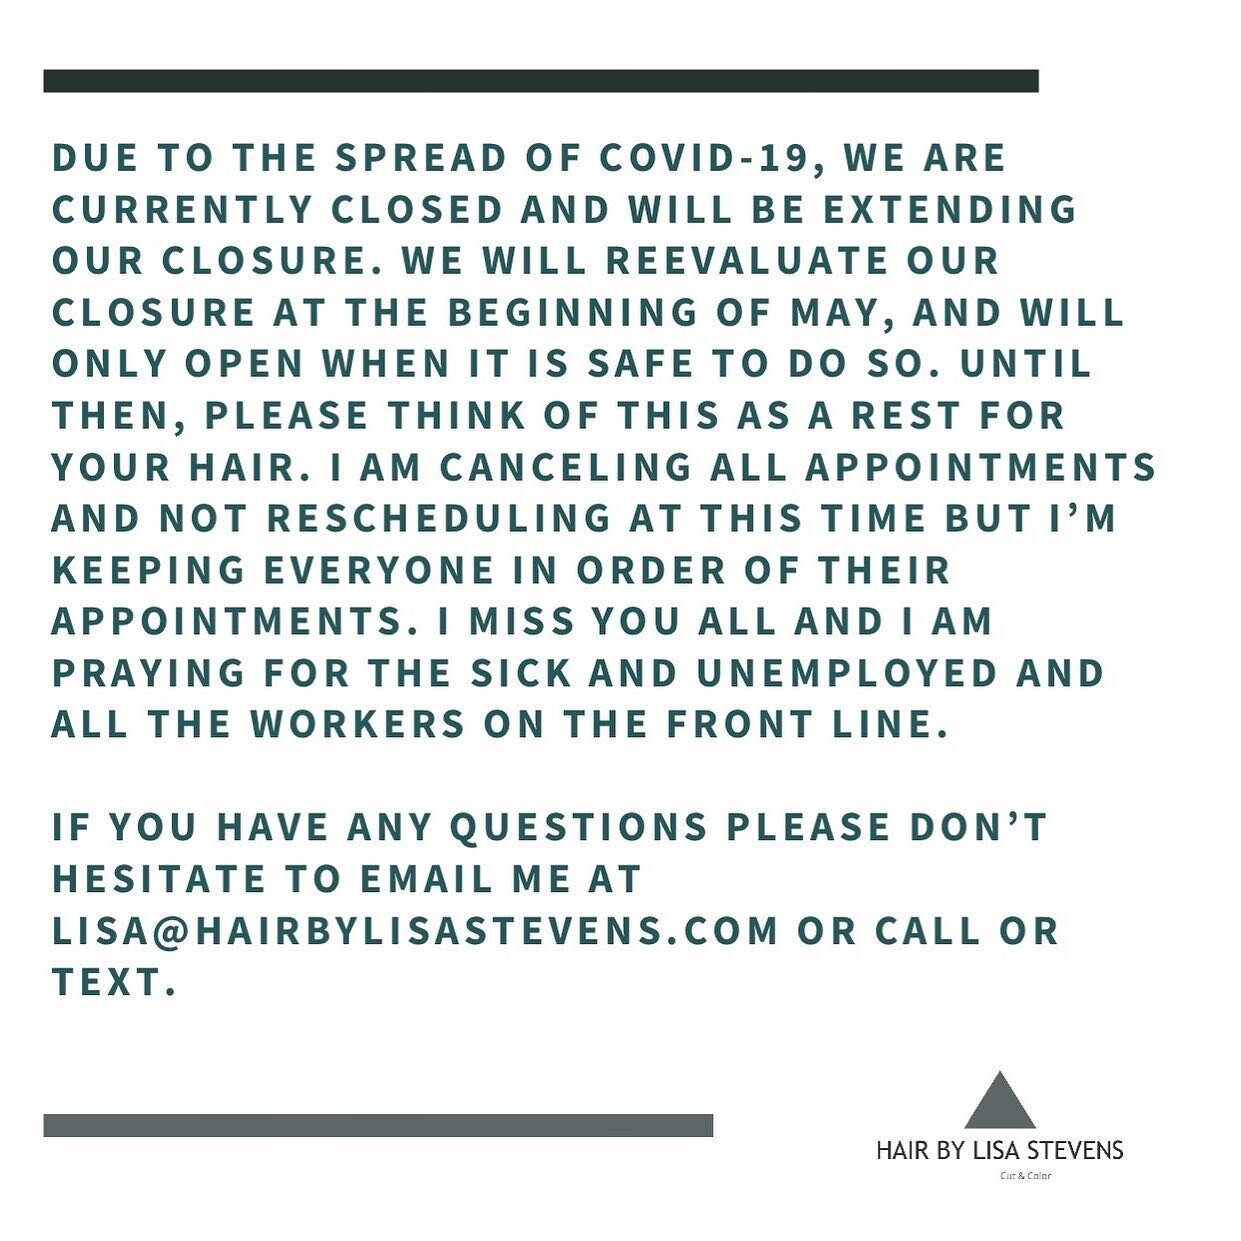 Please read. We are currently closed. We are all in this together. Please think of this as a hair reset.